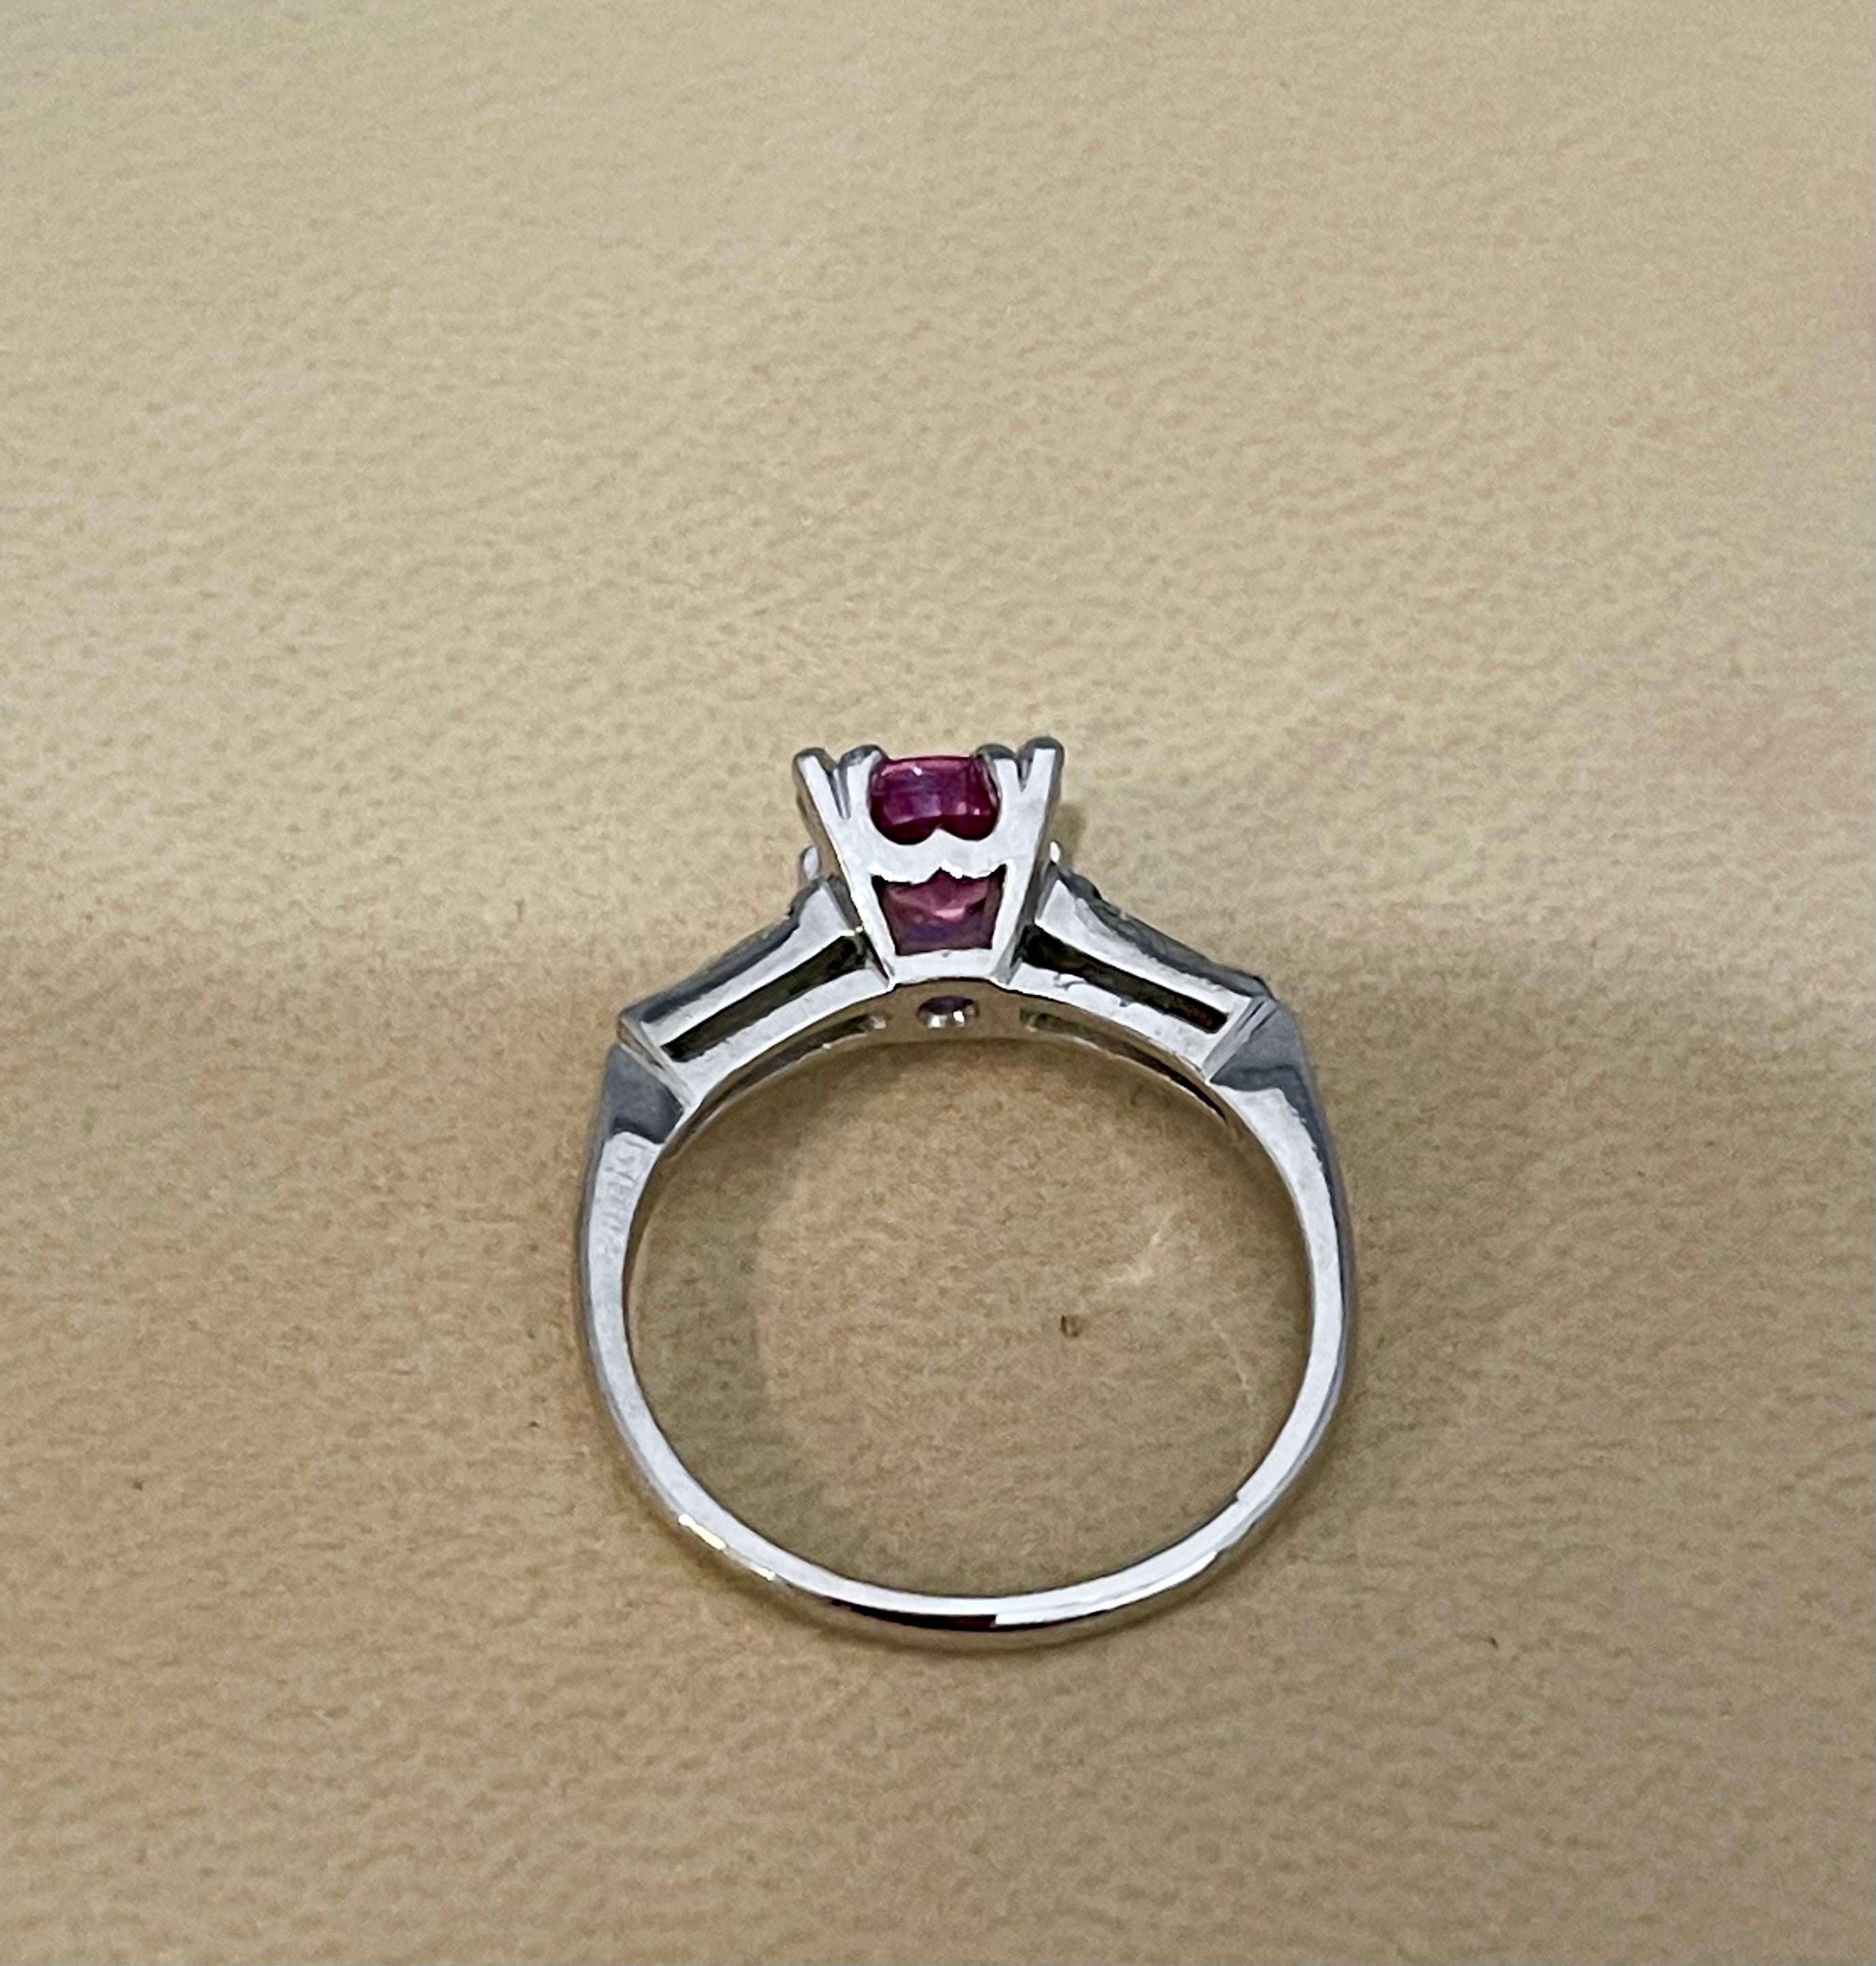 1 Ct Round Pink Sapphire 2 Baguettes Diamond in Platinum Ring, Estate For Sale 12